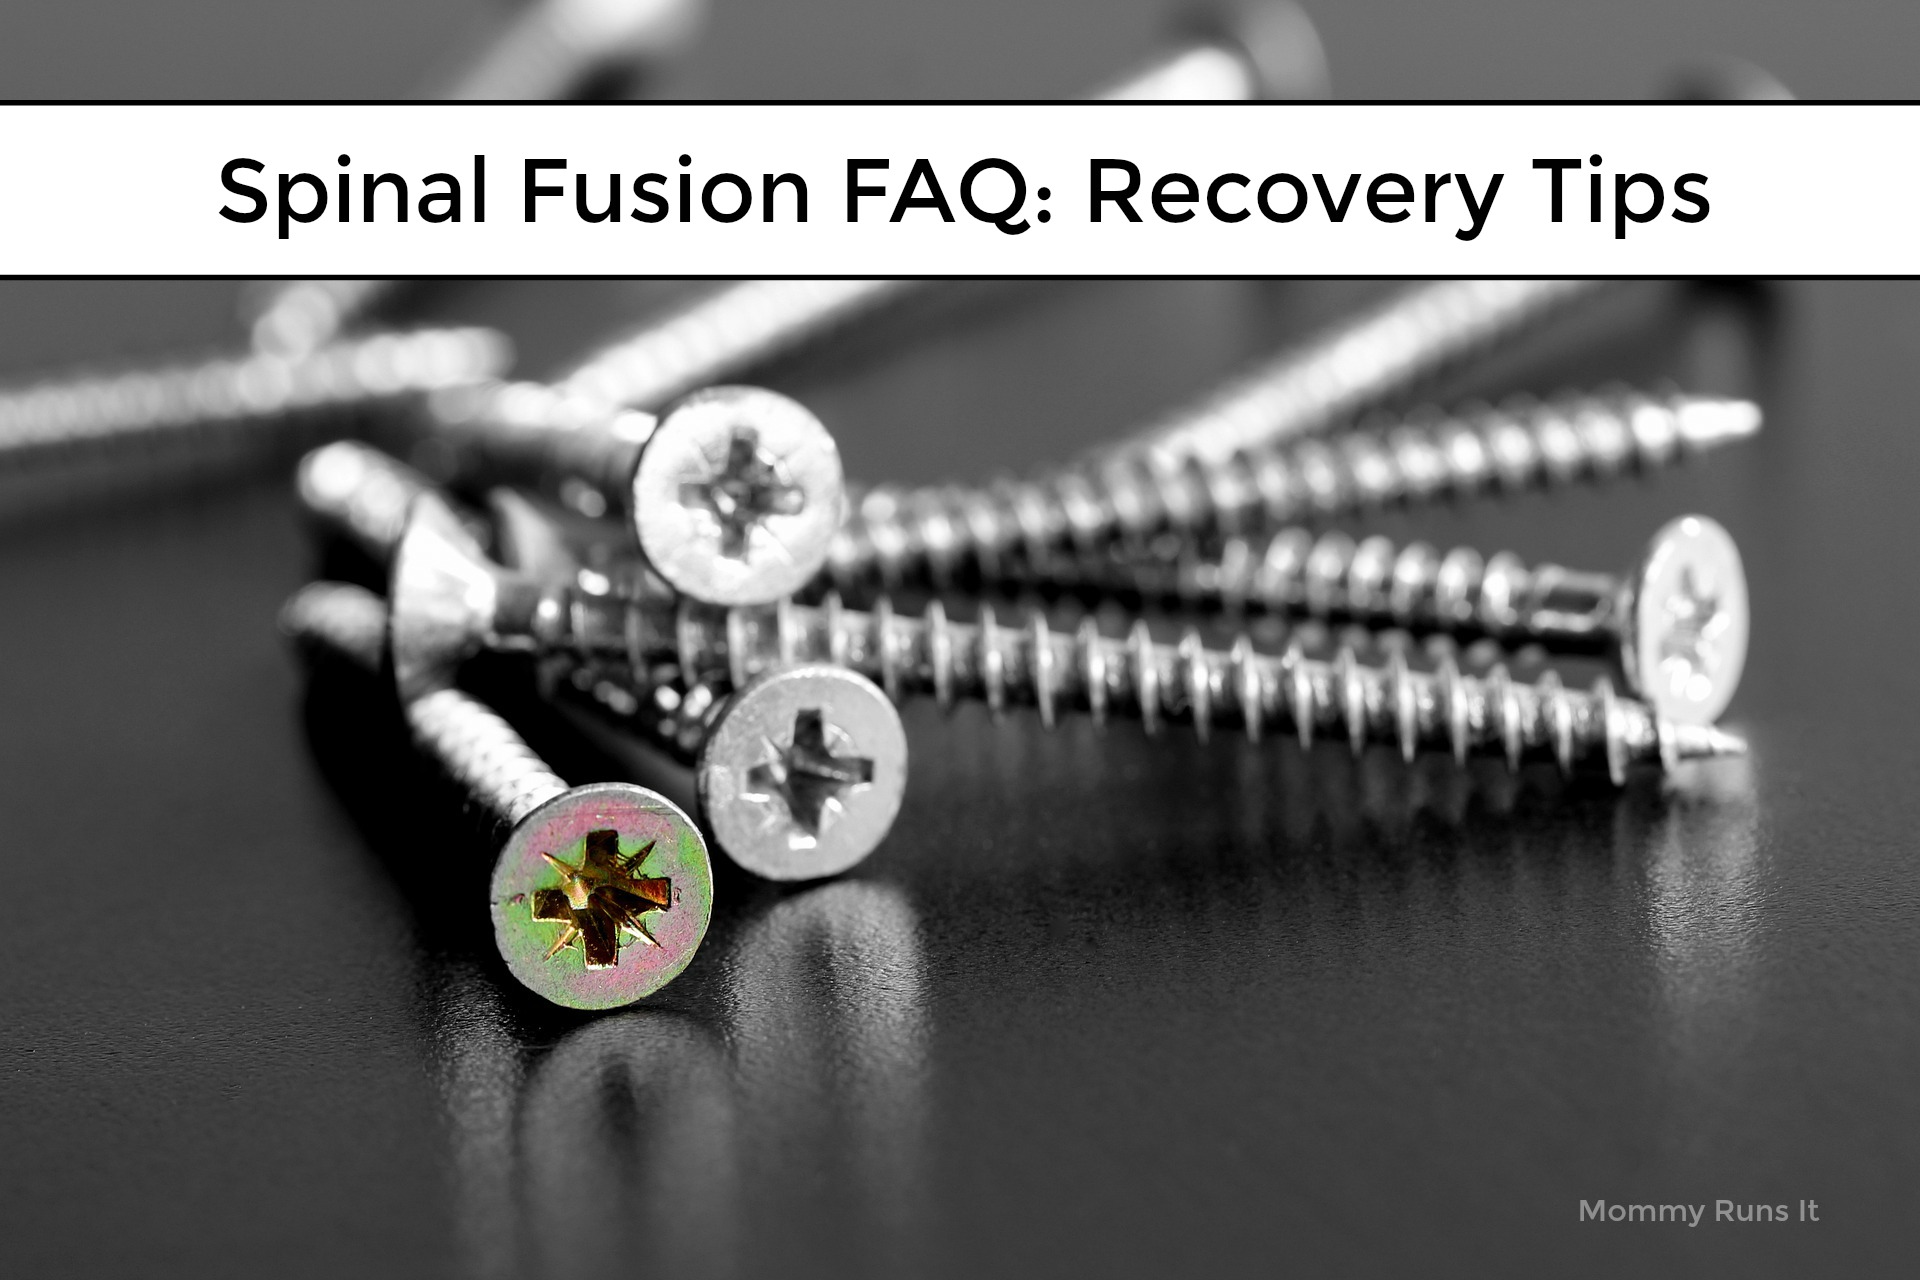 Spinal Fusion FAQ: Do You Have Any Spinal Fusion Surgery Recovery Tips? | Mommy Runs It